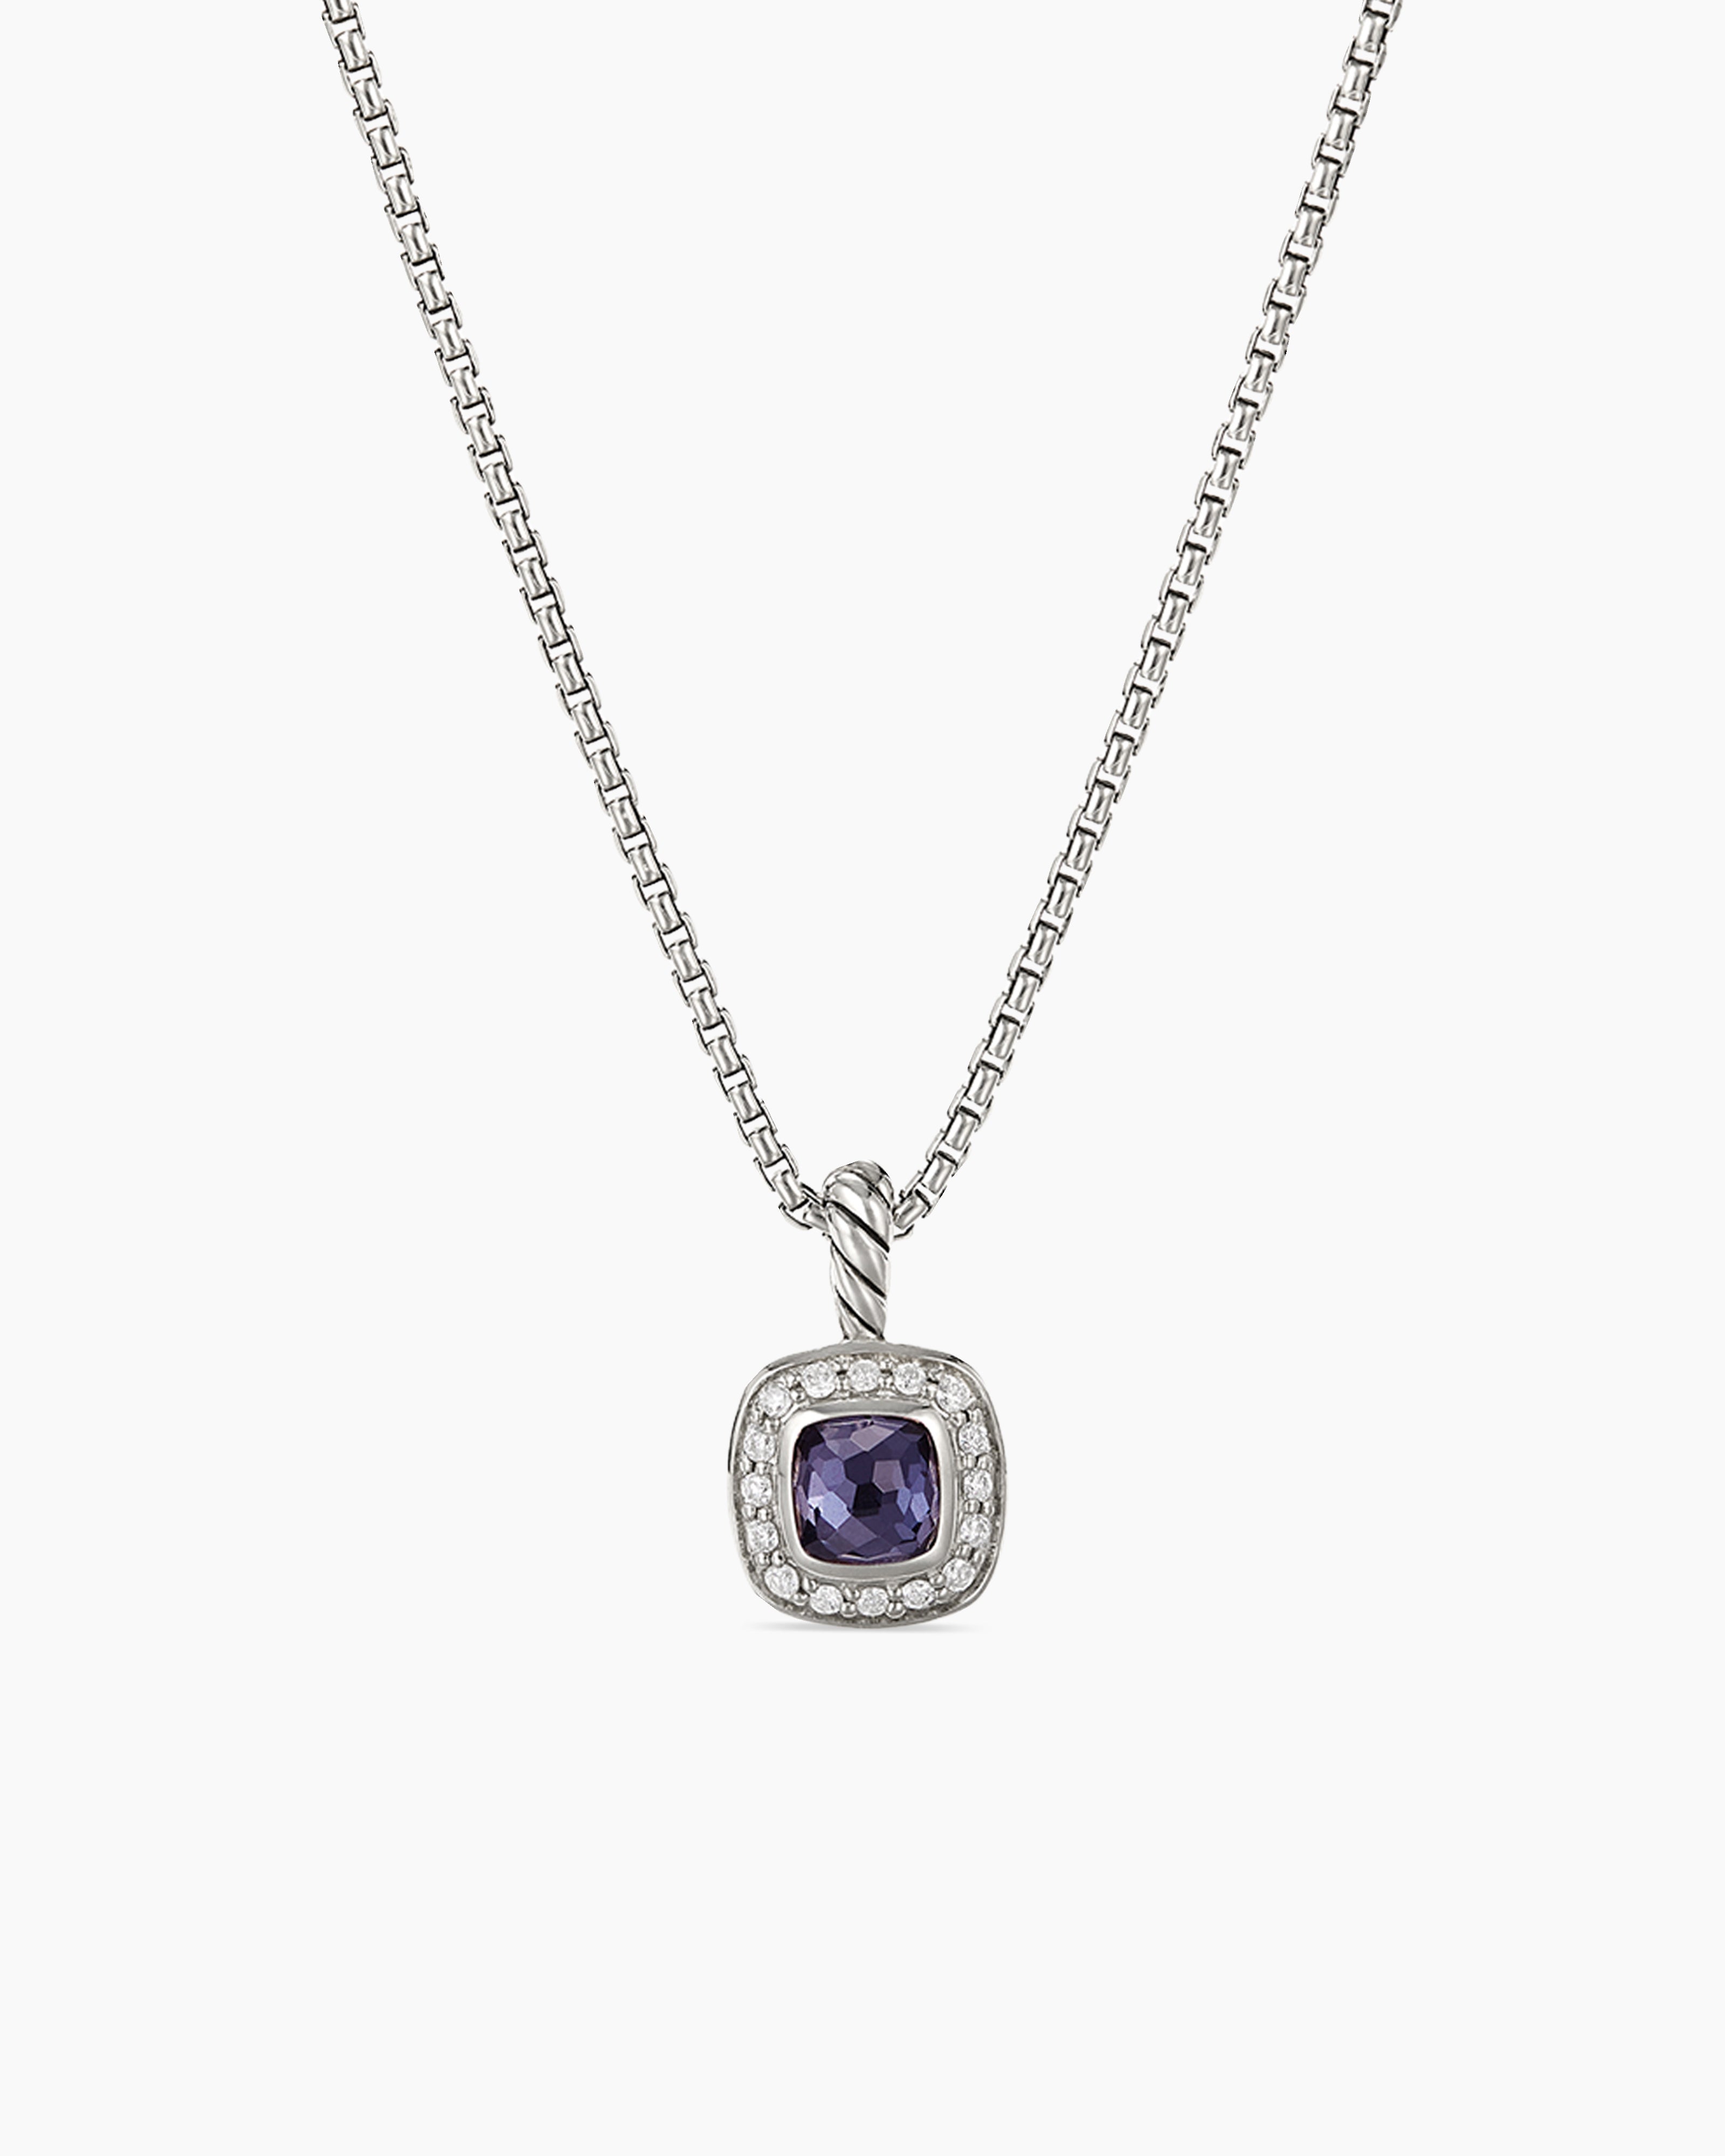 David Yurman Chatelaine® Pendant Necklace with Amethyst and Diamonds, 11mm  | REEDS Jewelers